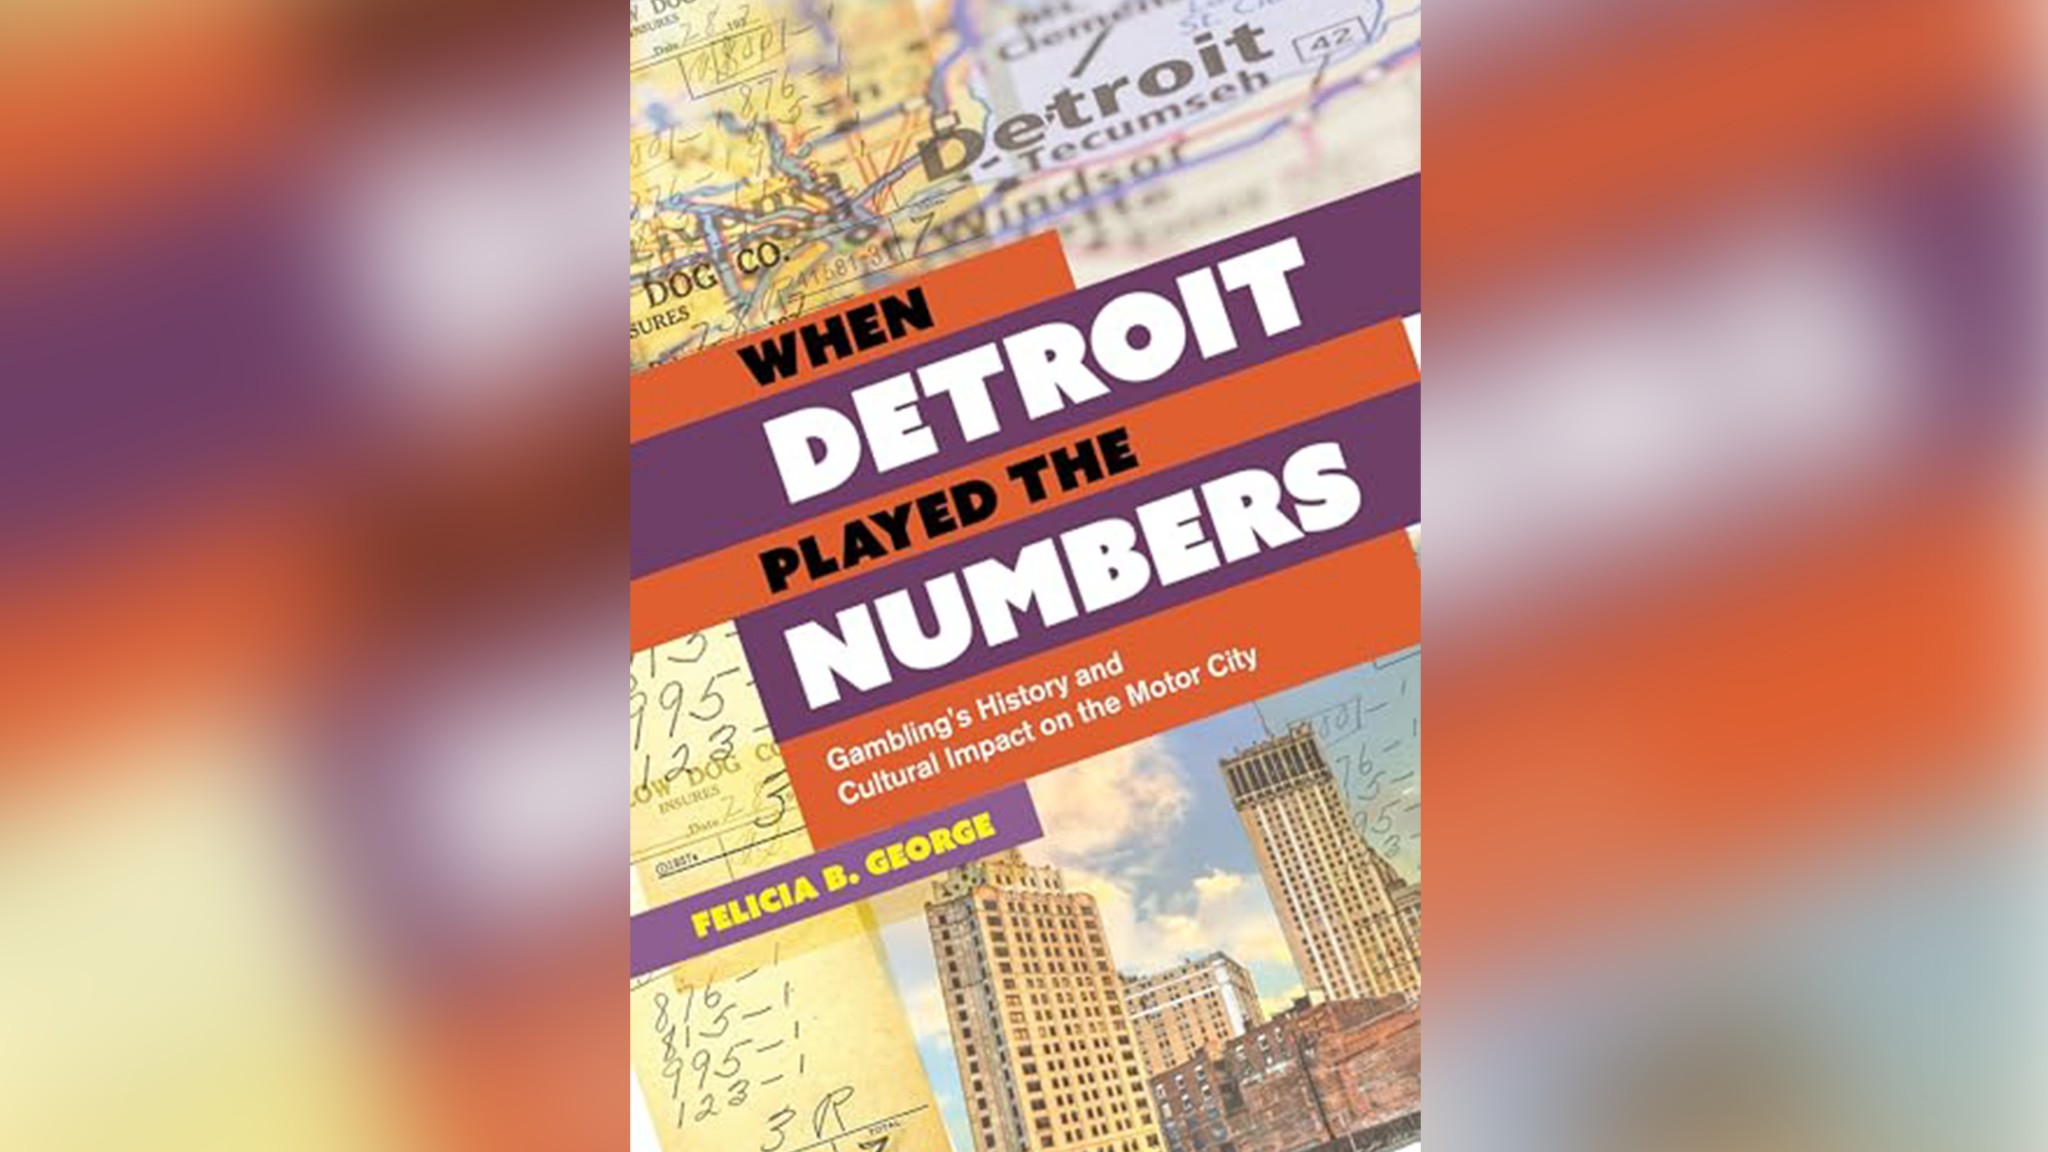 "When Detroit Played the Numbers: Gambling's History and Cultural Impact on the Motor City" by Felicia George will be available on March 26, 2024.